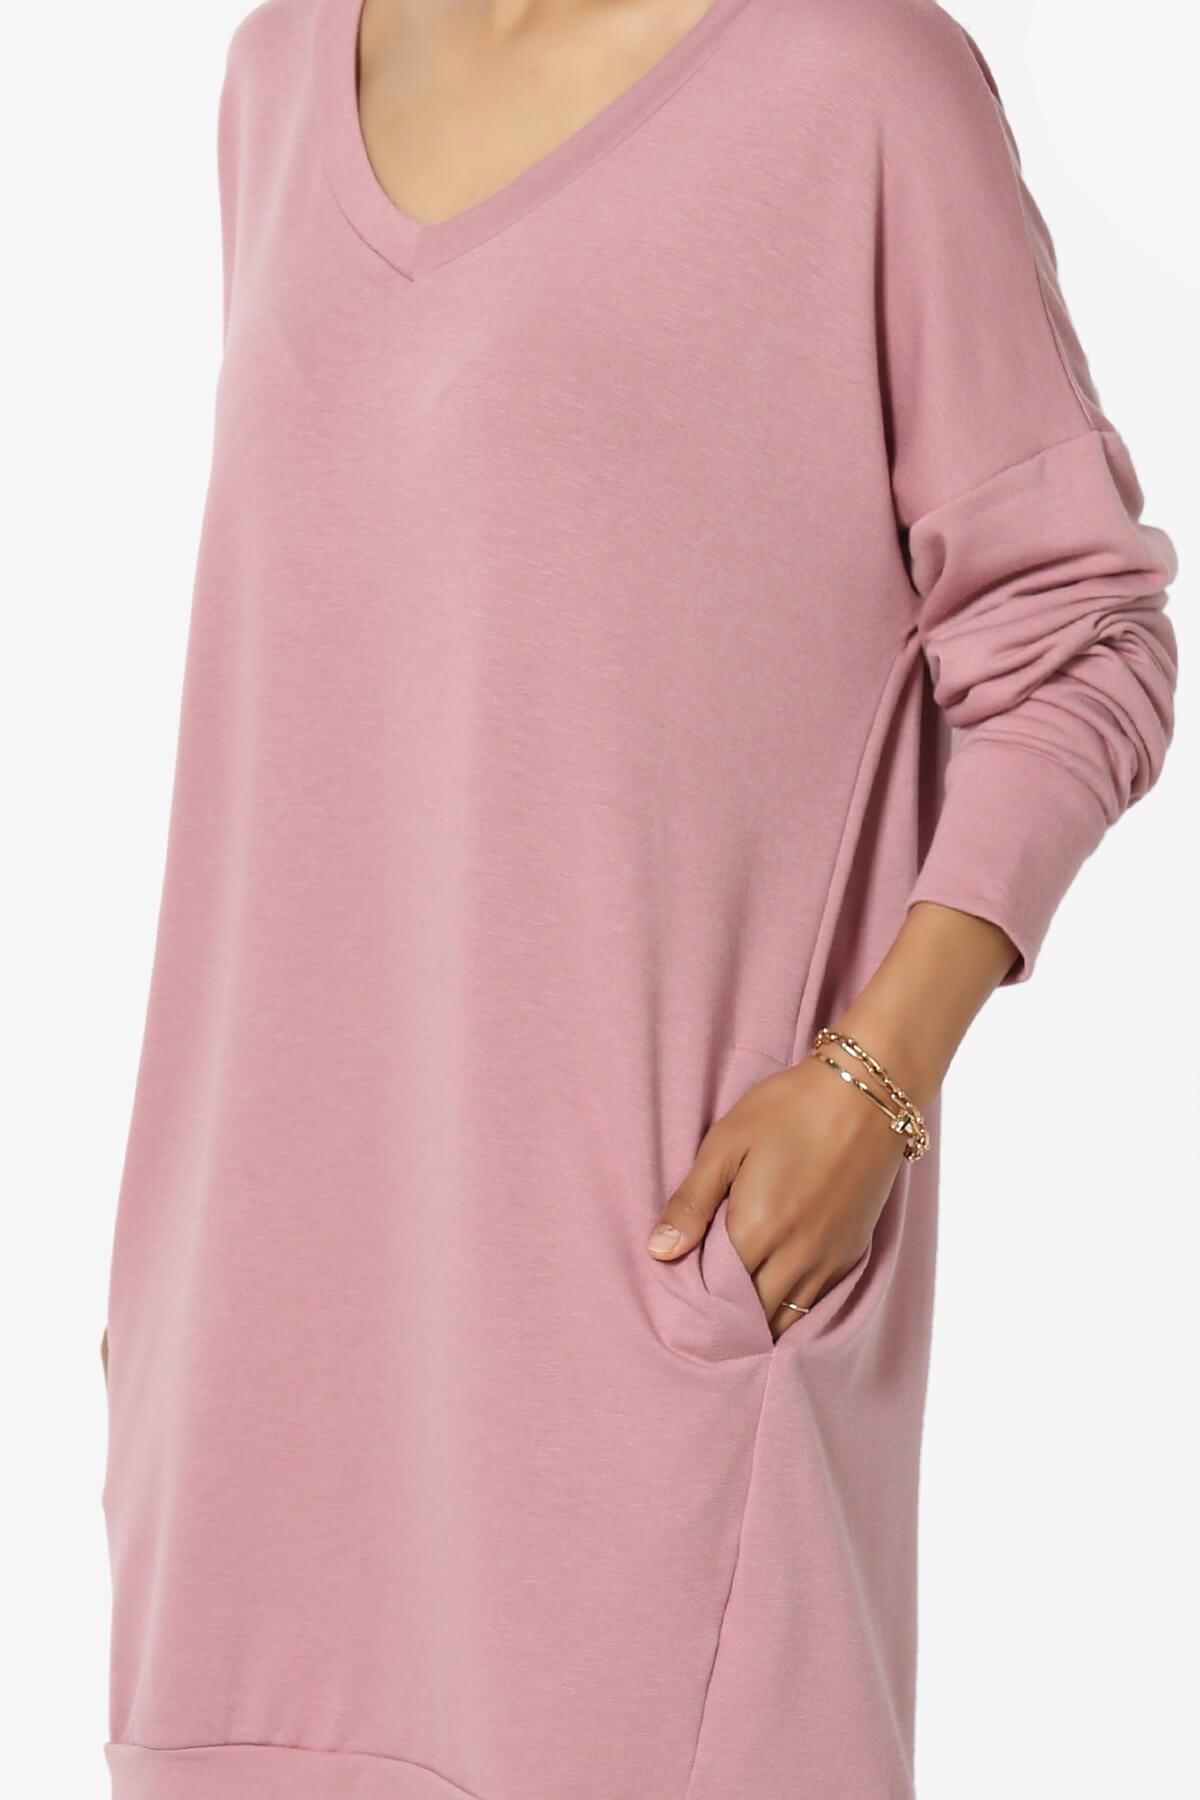 Load image into Gallery viewer, Chrissy V-Neck Pocket Soft Terry Tunic LIGHT ROSE_5
